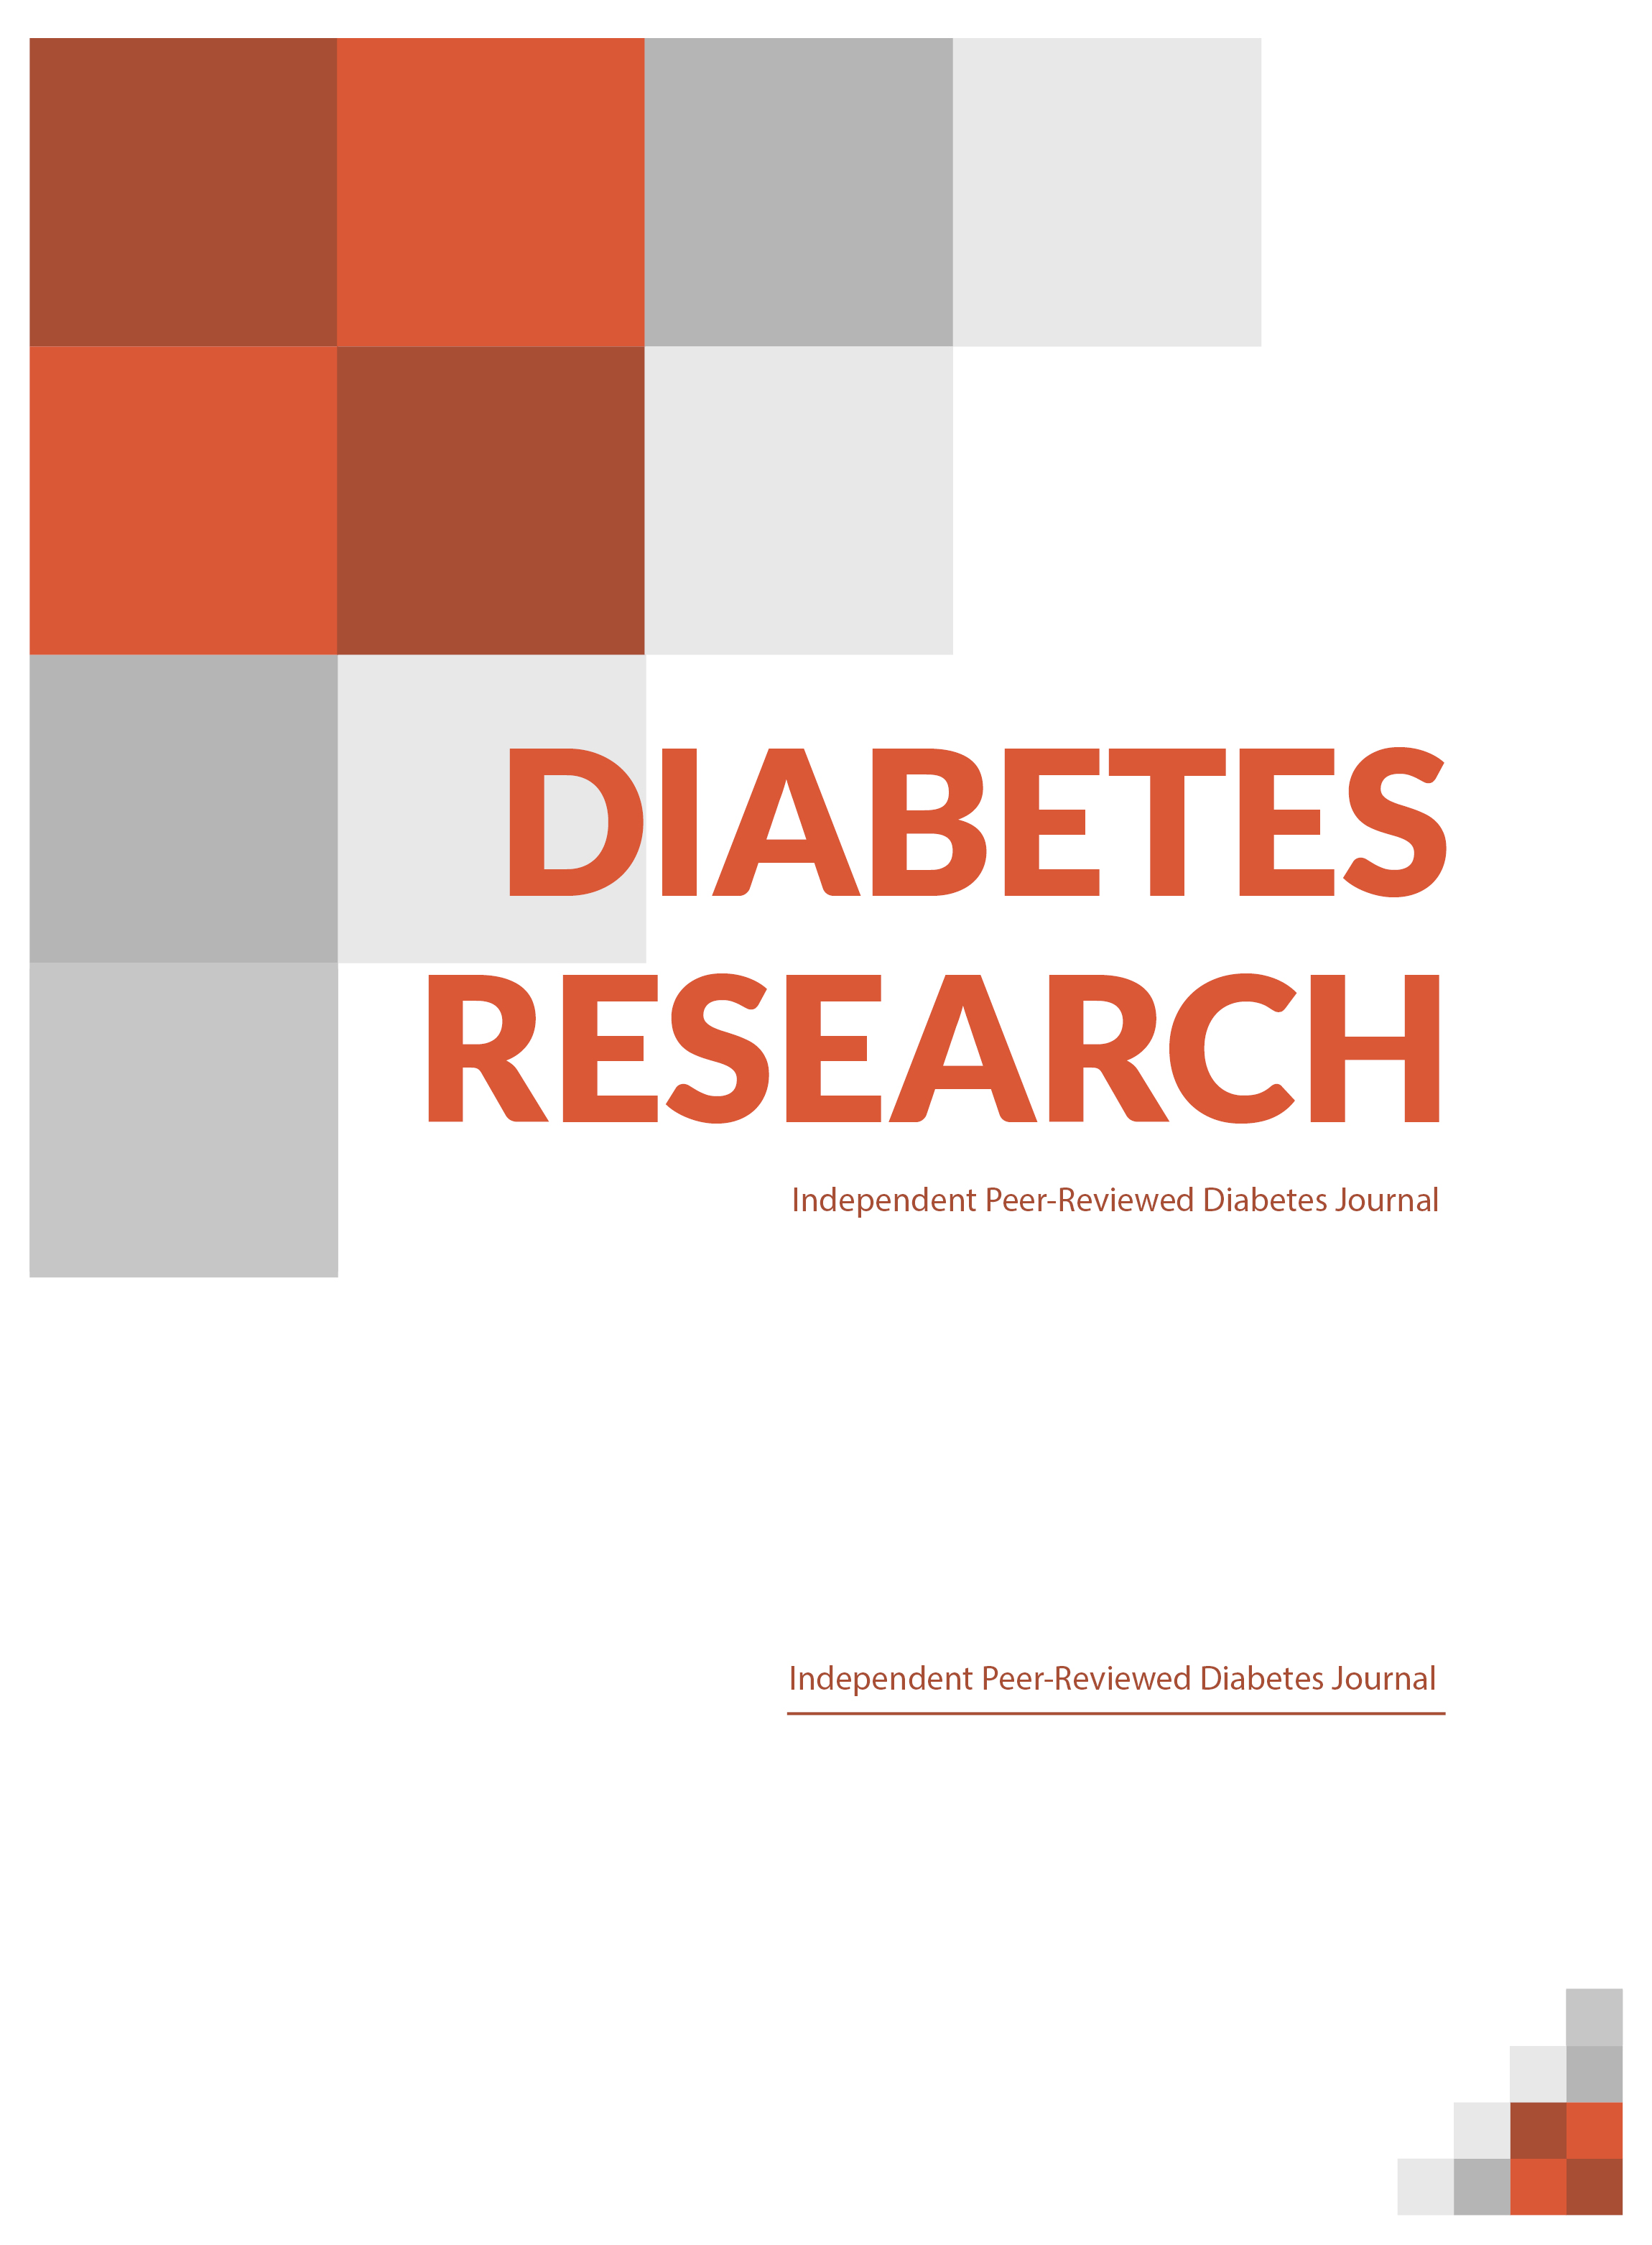 research work on diabetes